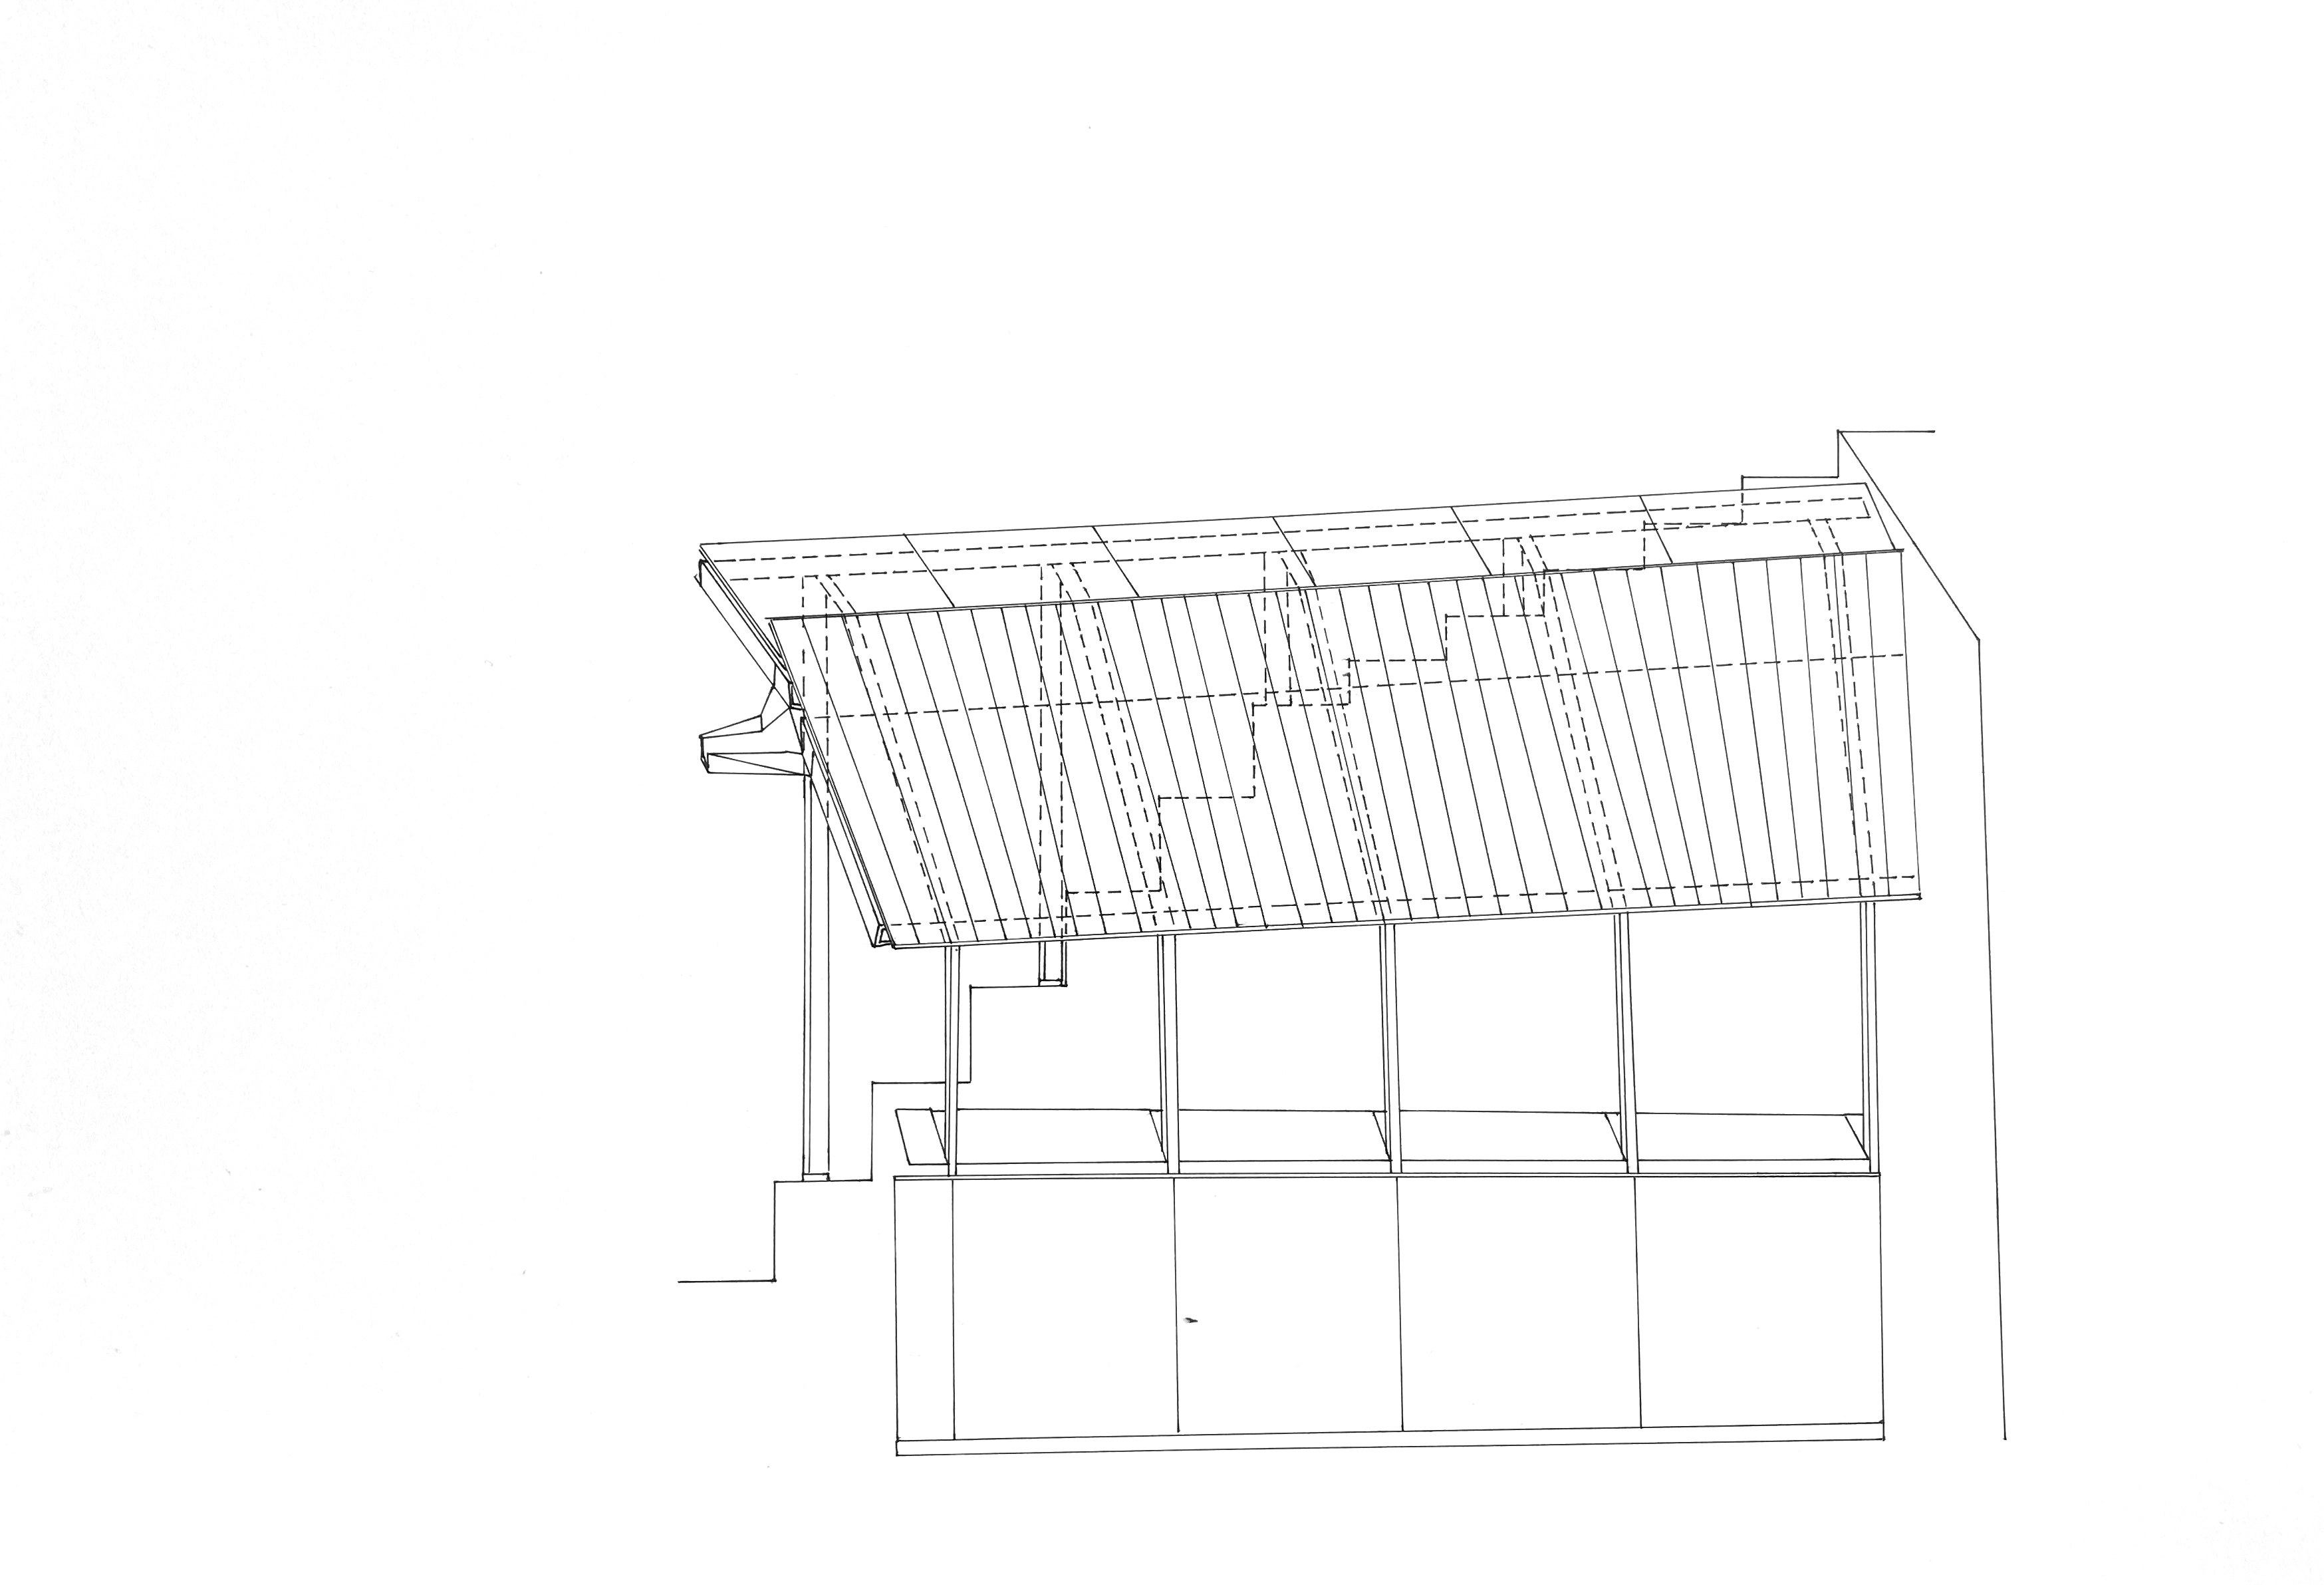 black line drawing on white of a small structure. the building has a roof with lines on it, a row of windows with a shelf, with the structure resting on a stairway behind it